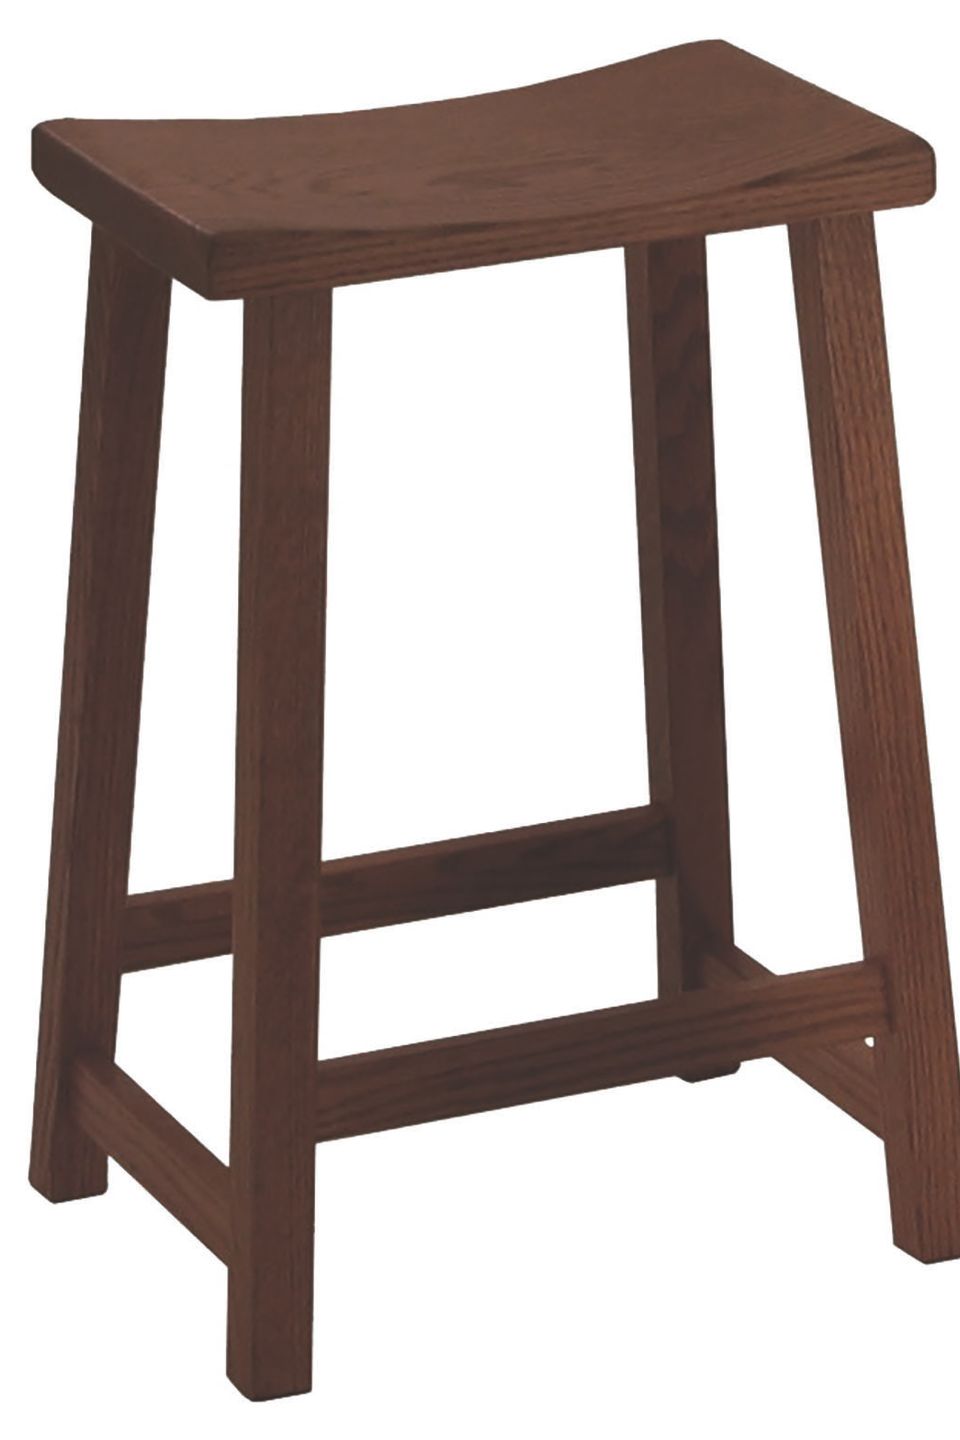 Cd staley counter stool 11824